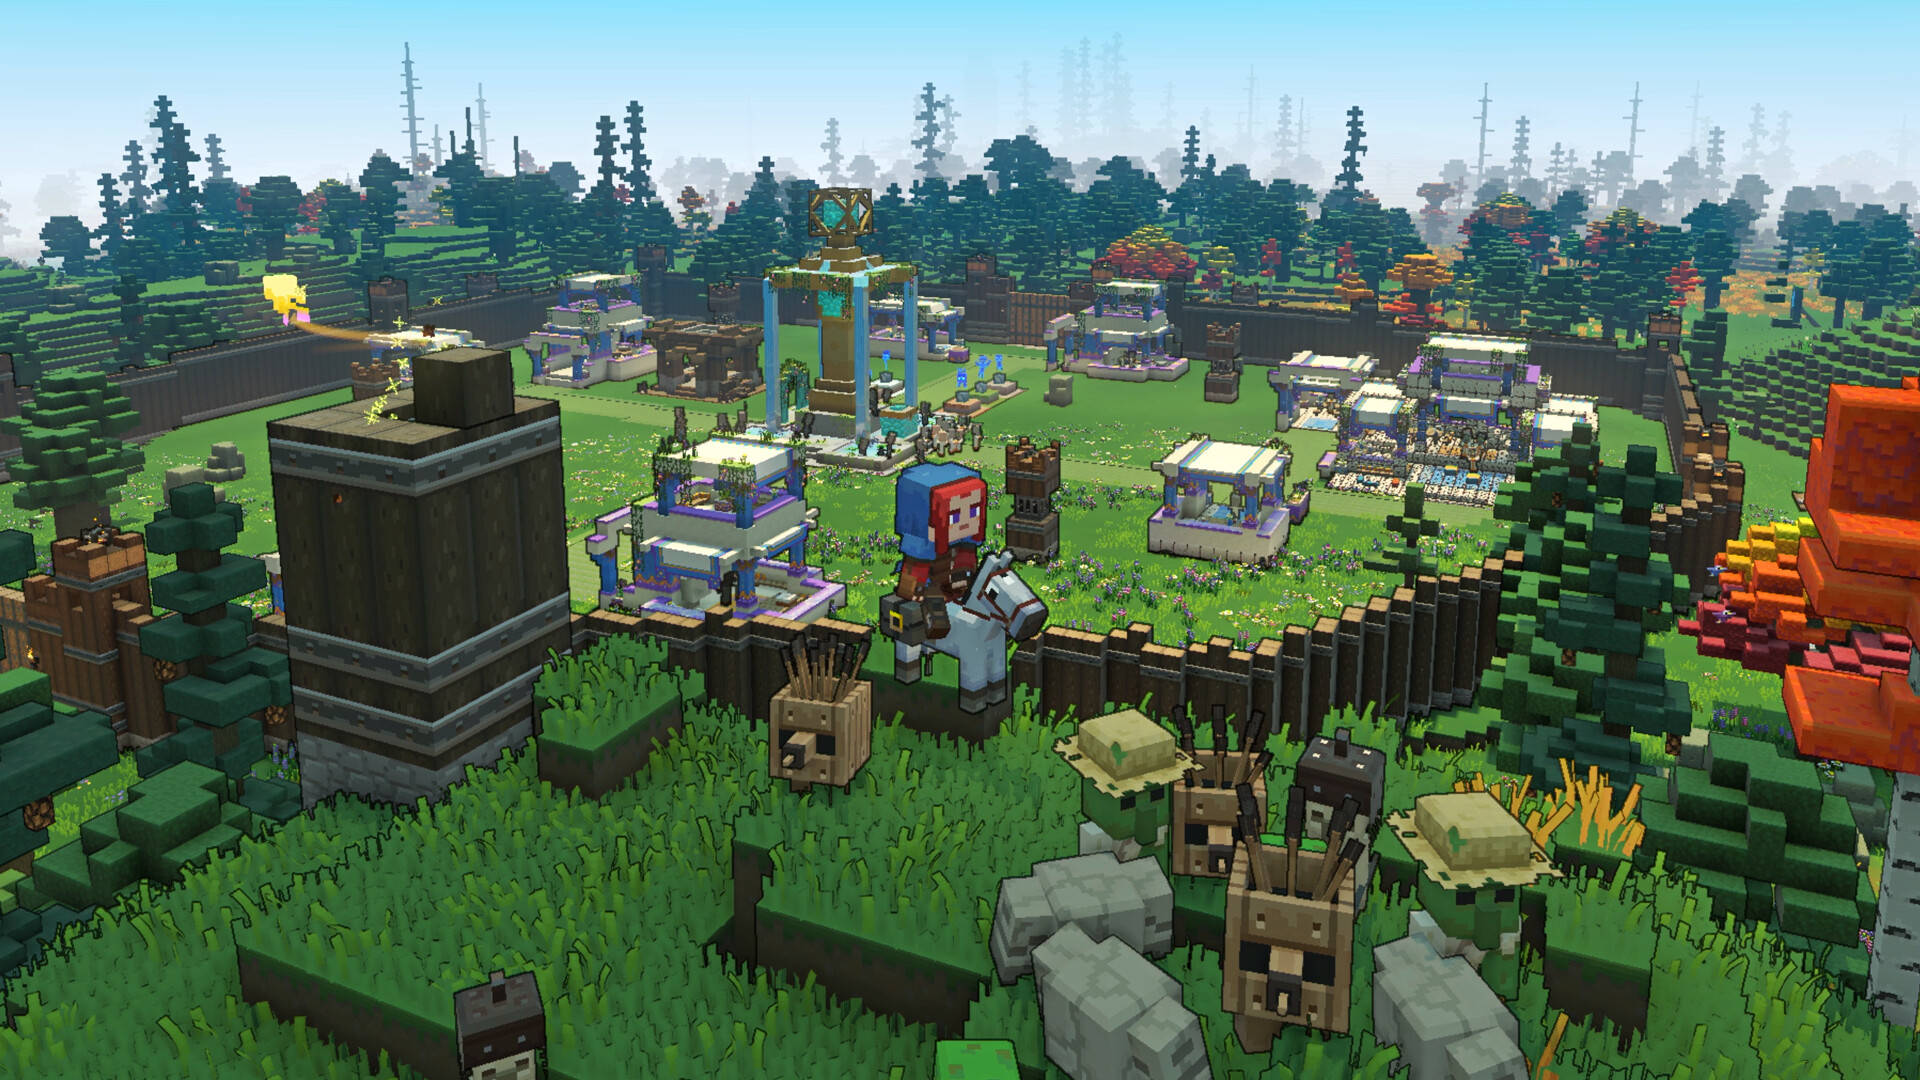 Minecraft Legends release date, Trailer & news on RTS game